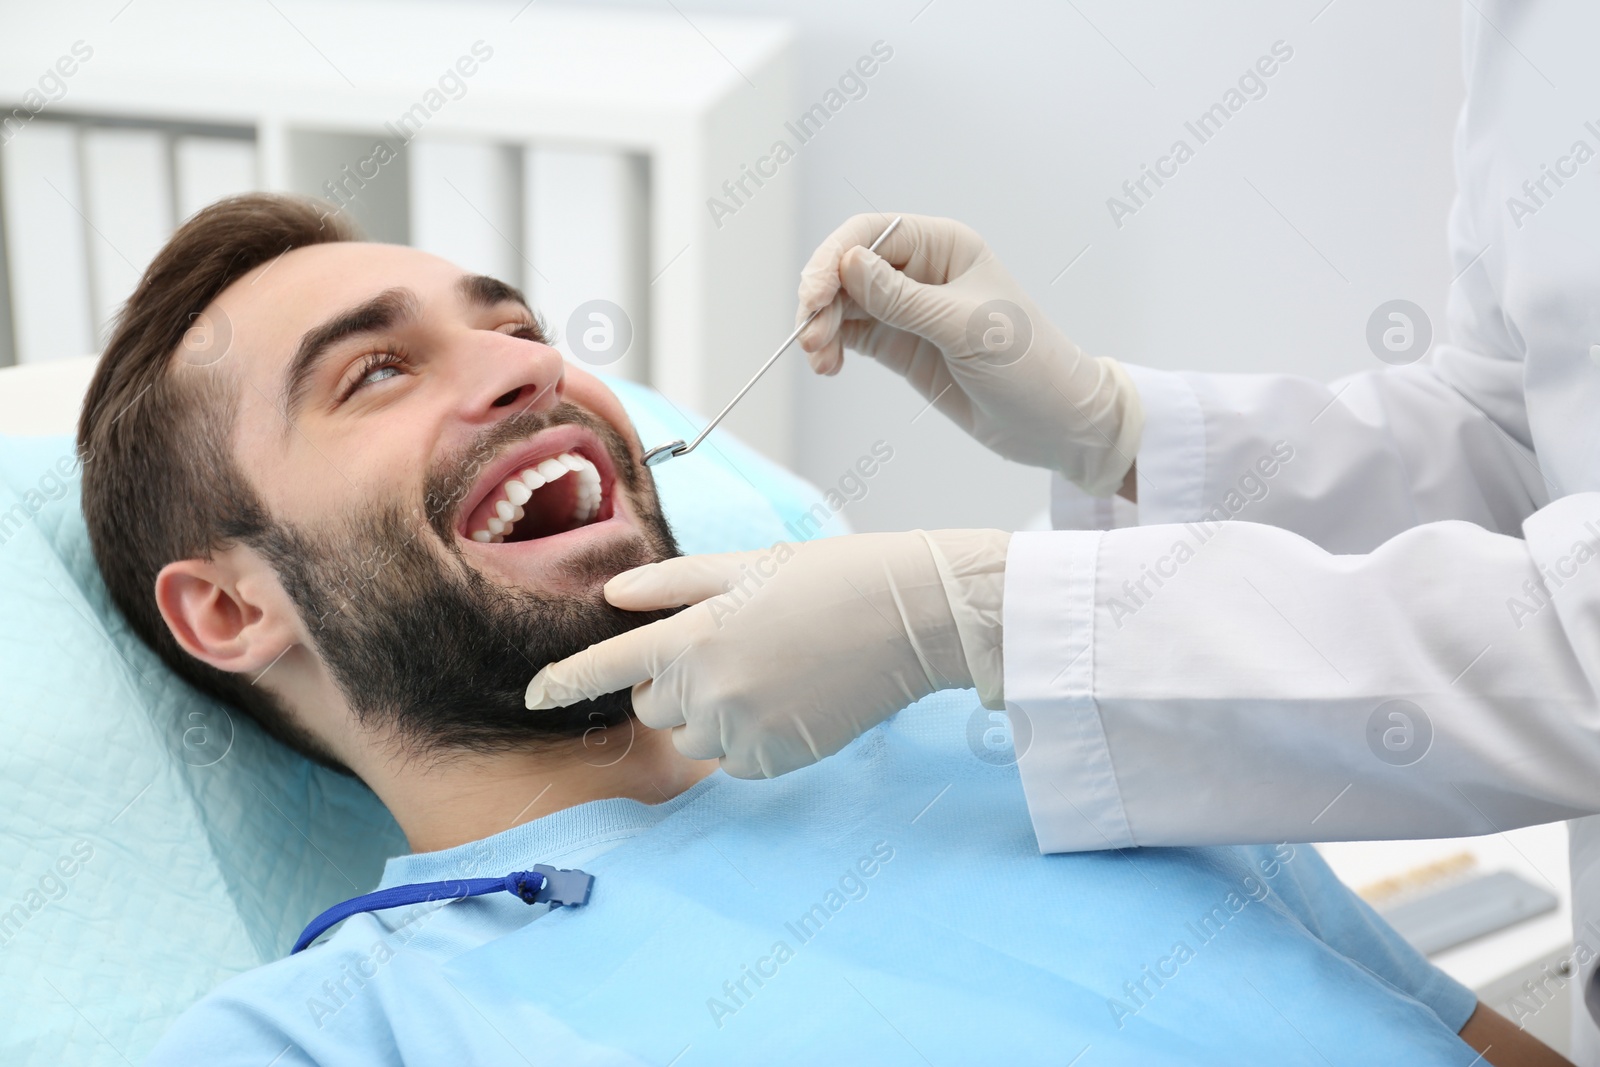 Photo of Dentist examining young man's teeth with mirror in hospital